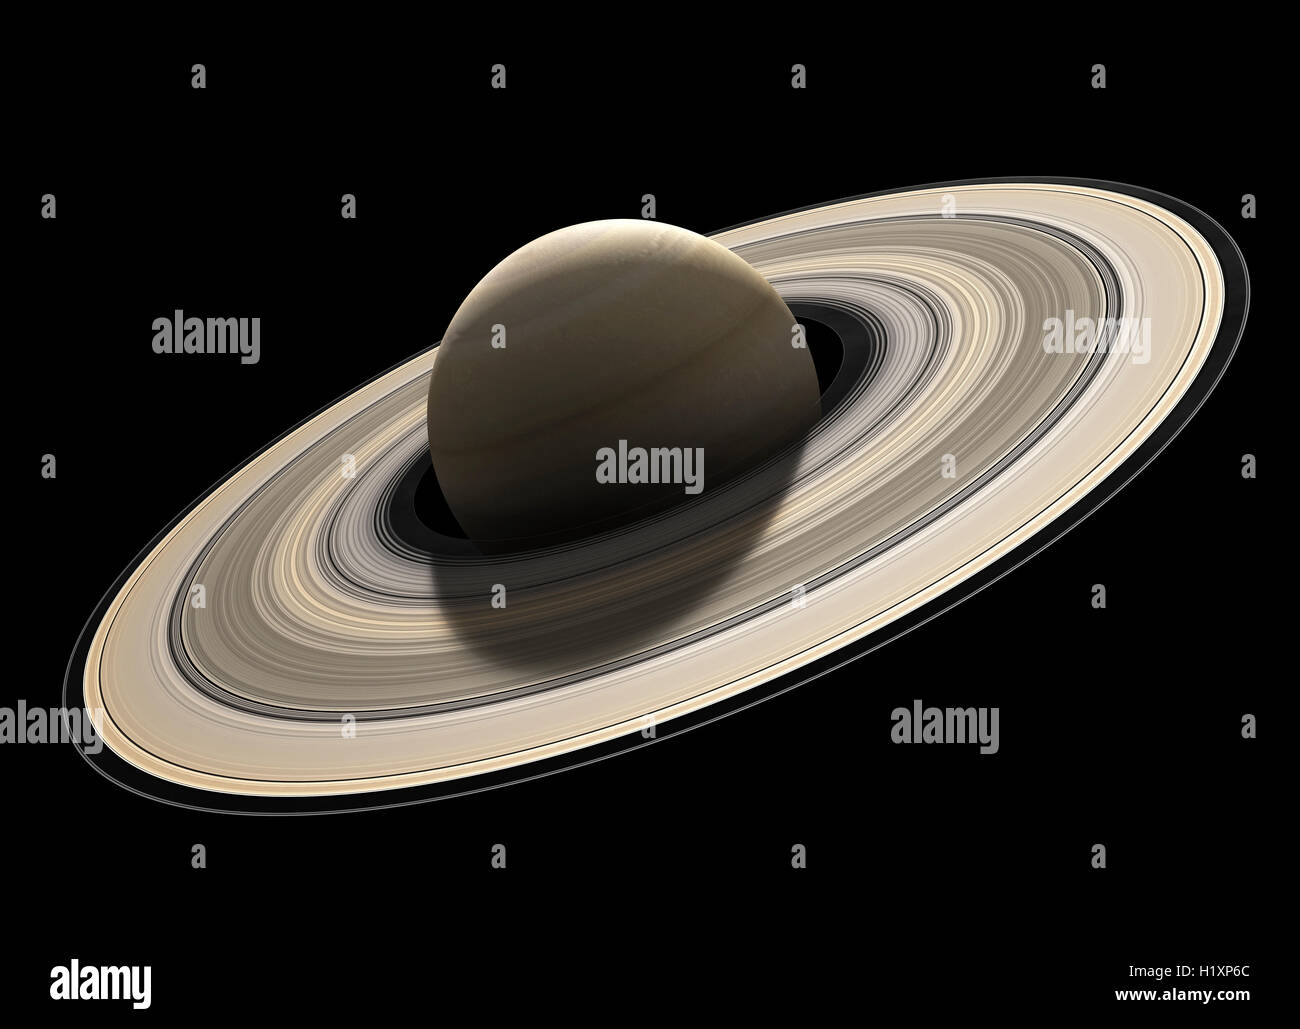 Planet Saturn rendered to scale and isolated on black (Elements of planet texture for 3d model furnished by NASA) Stock Photo